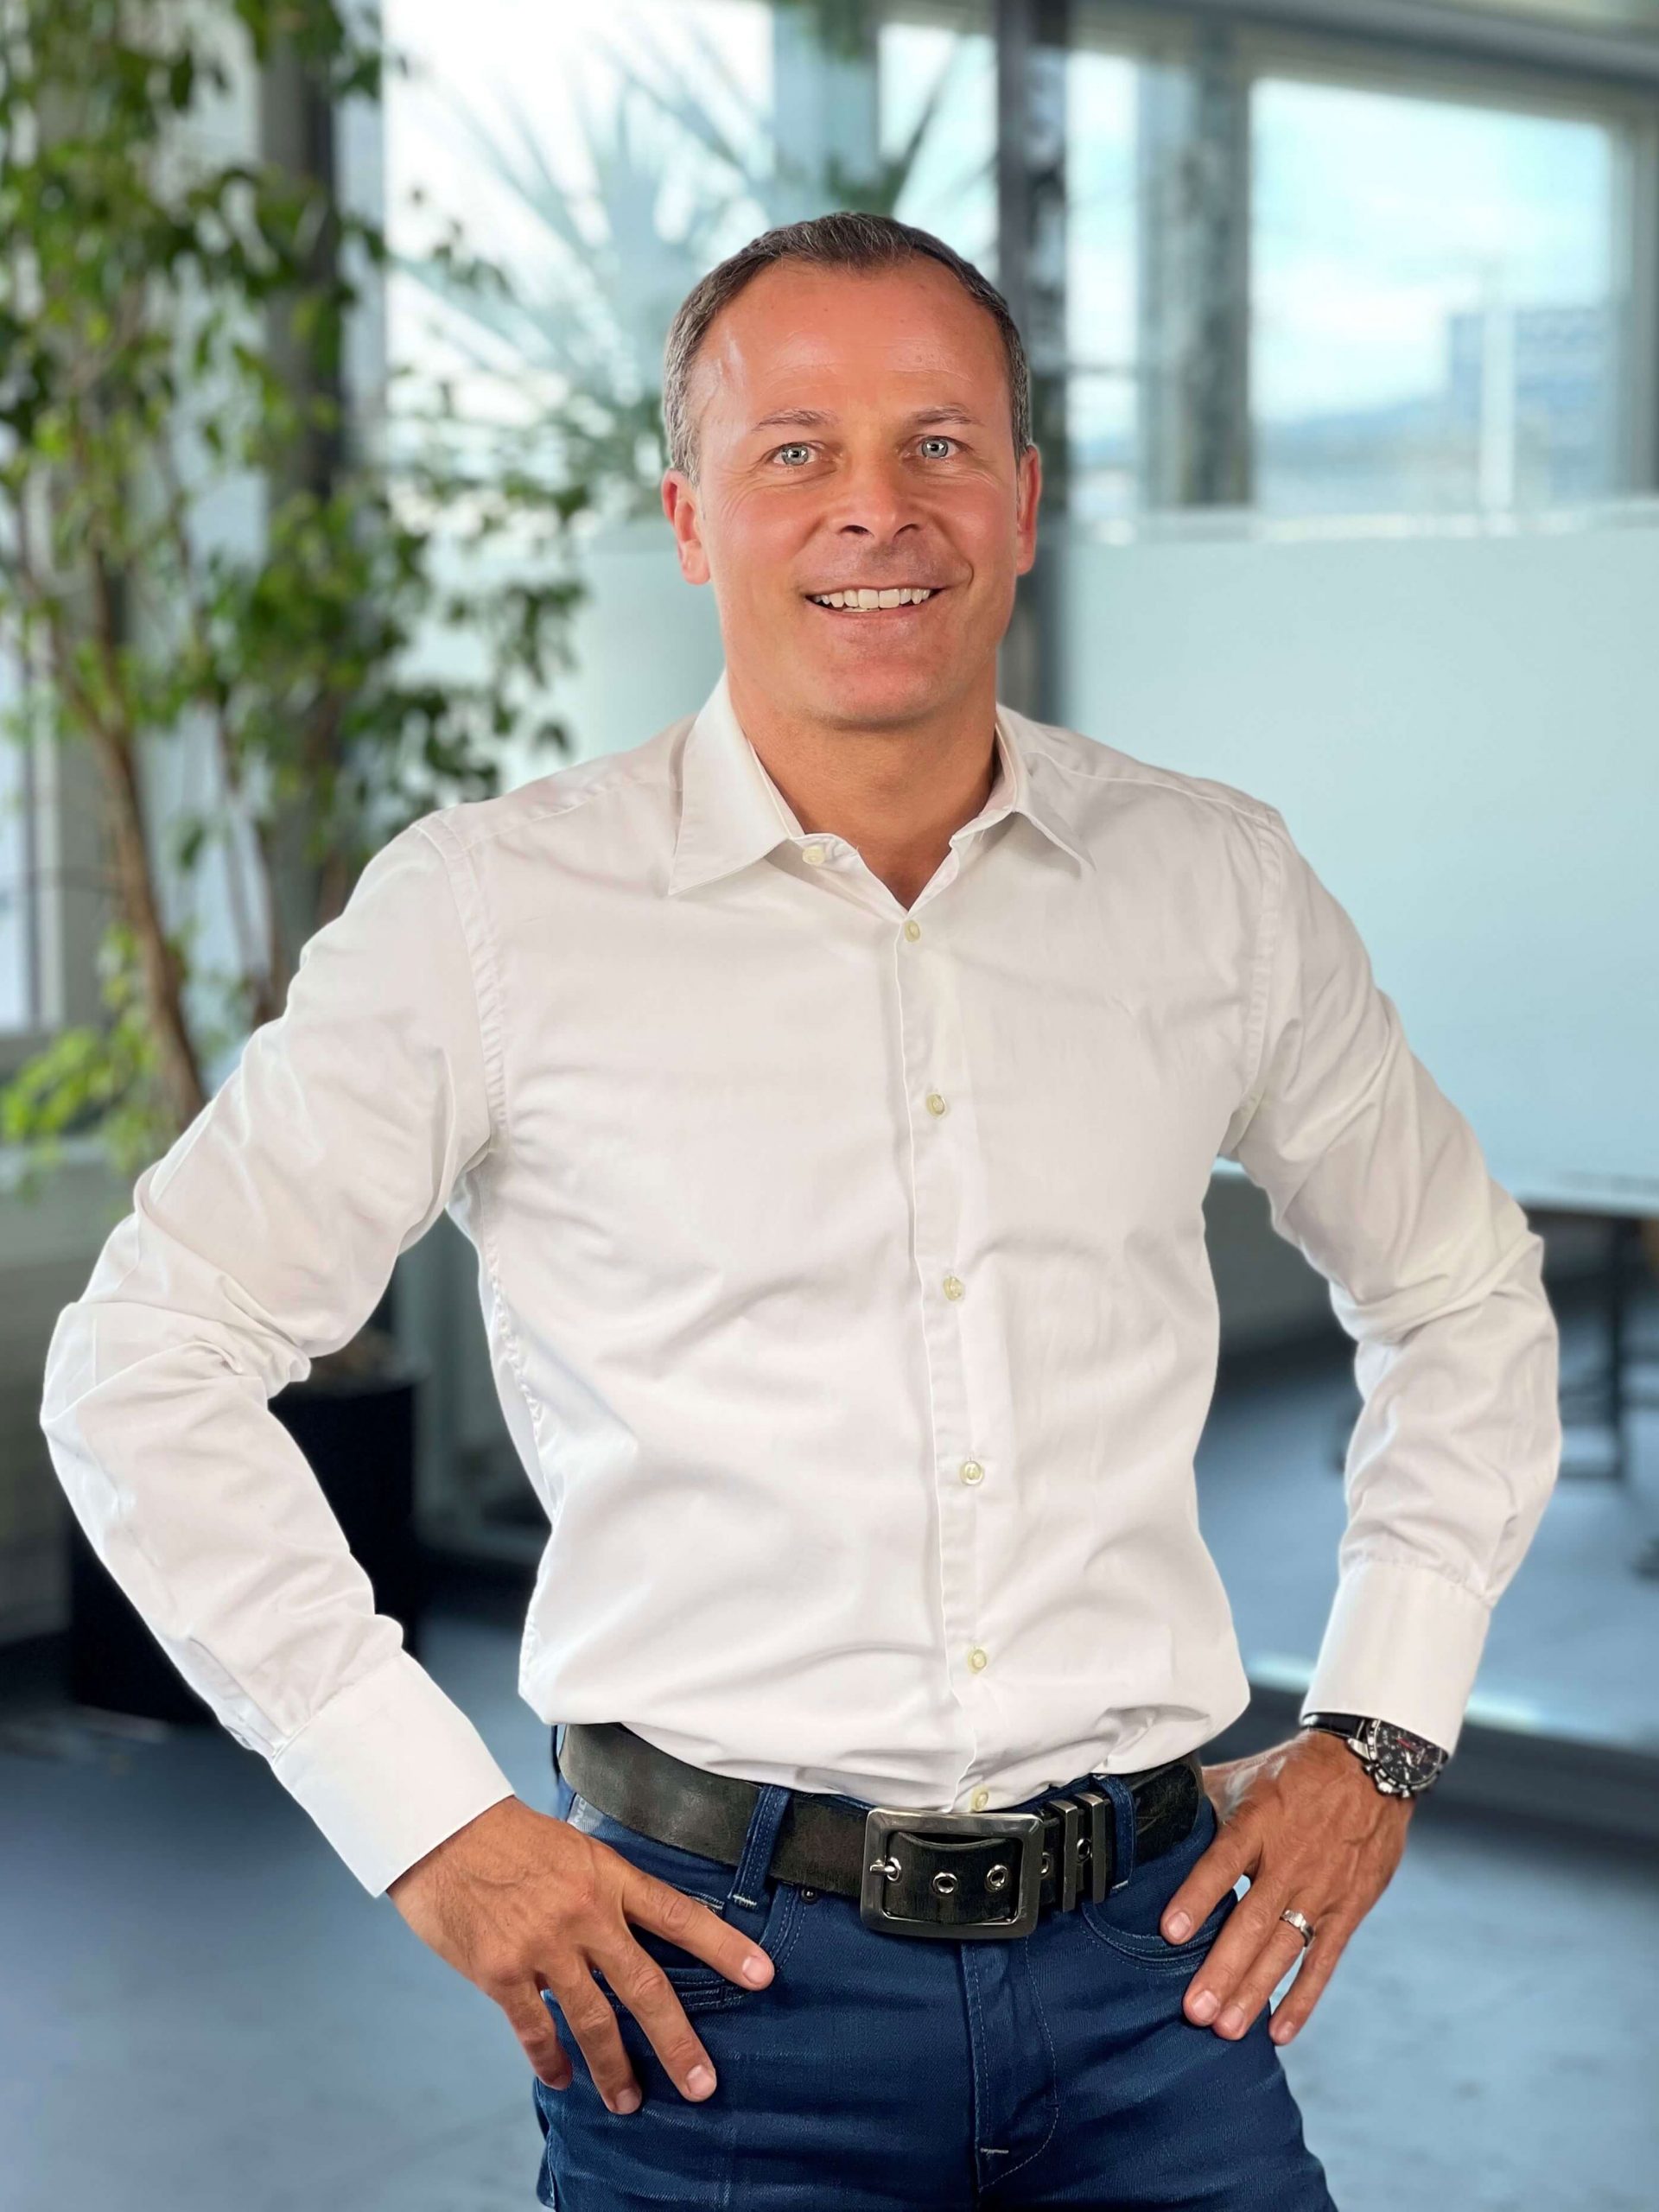 Markus Büchel Expert Product Manager, Member of the Board of Directors